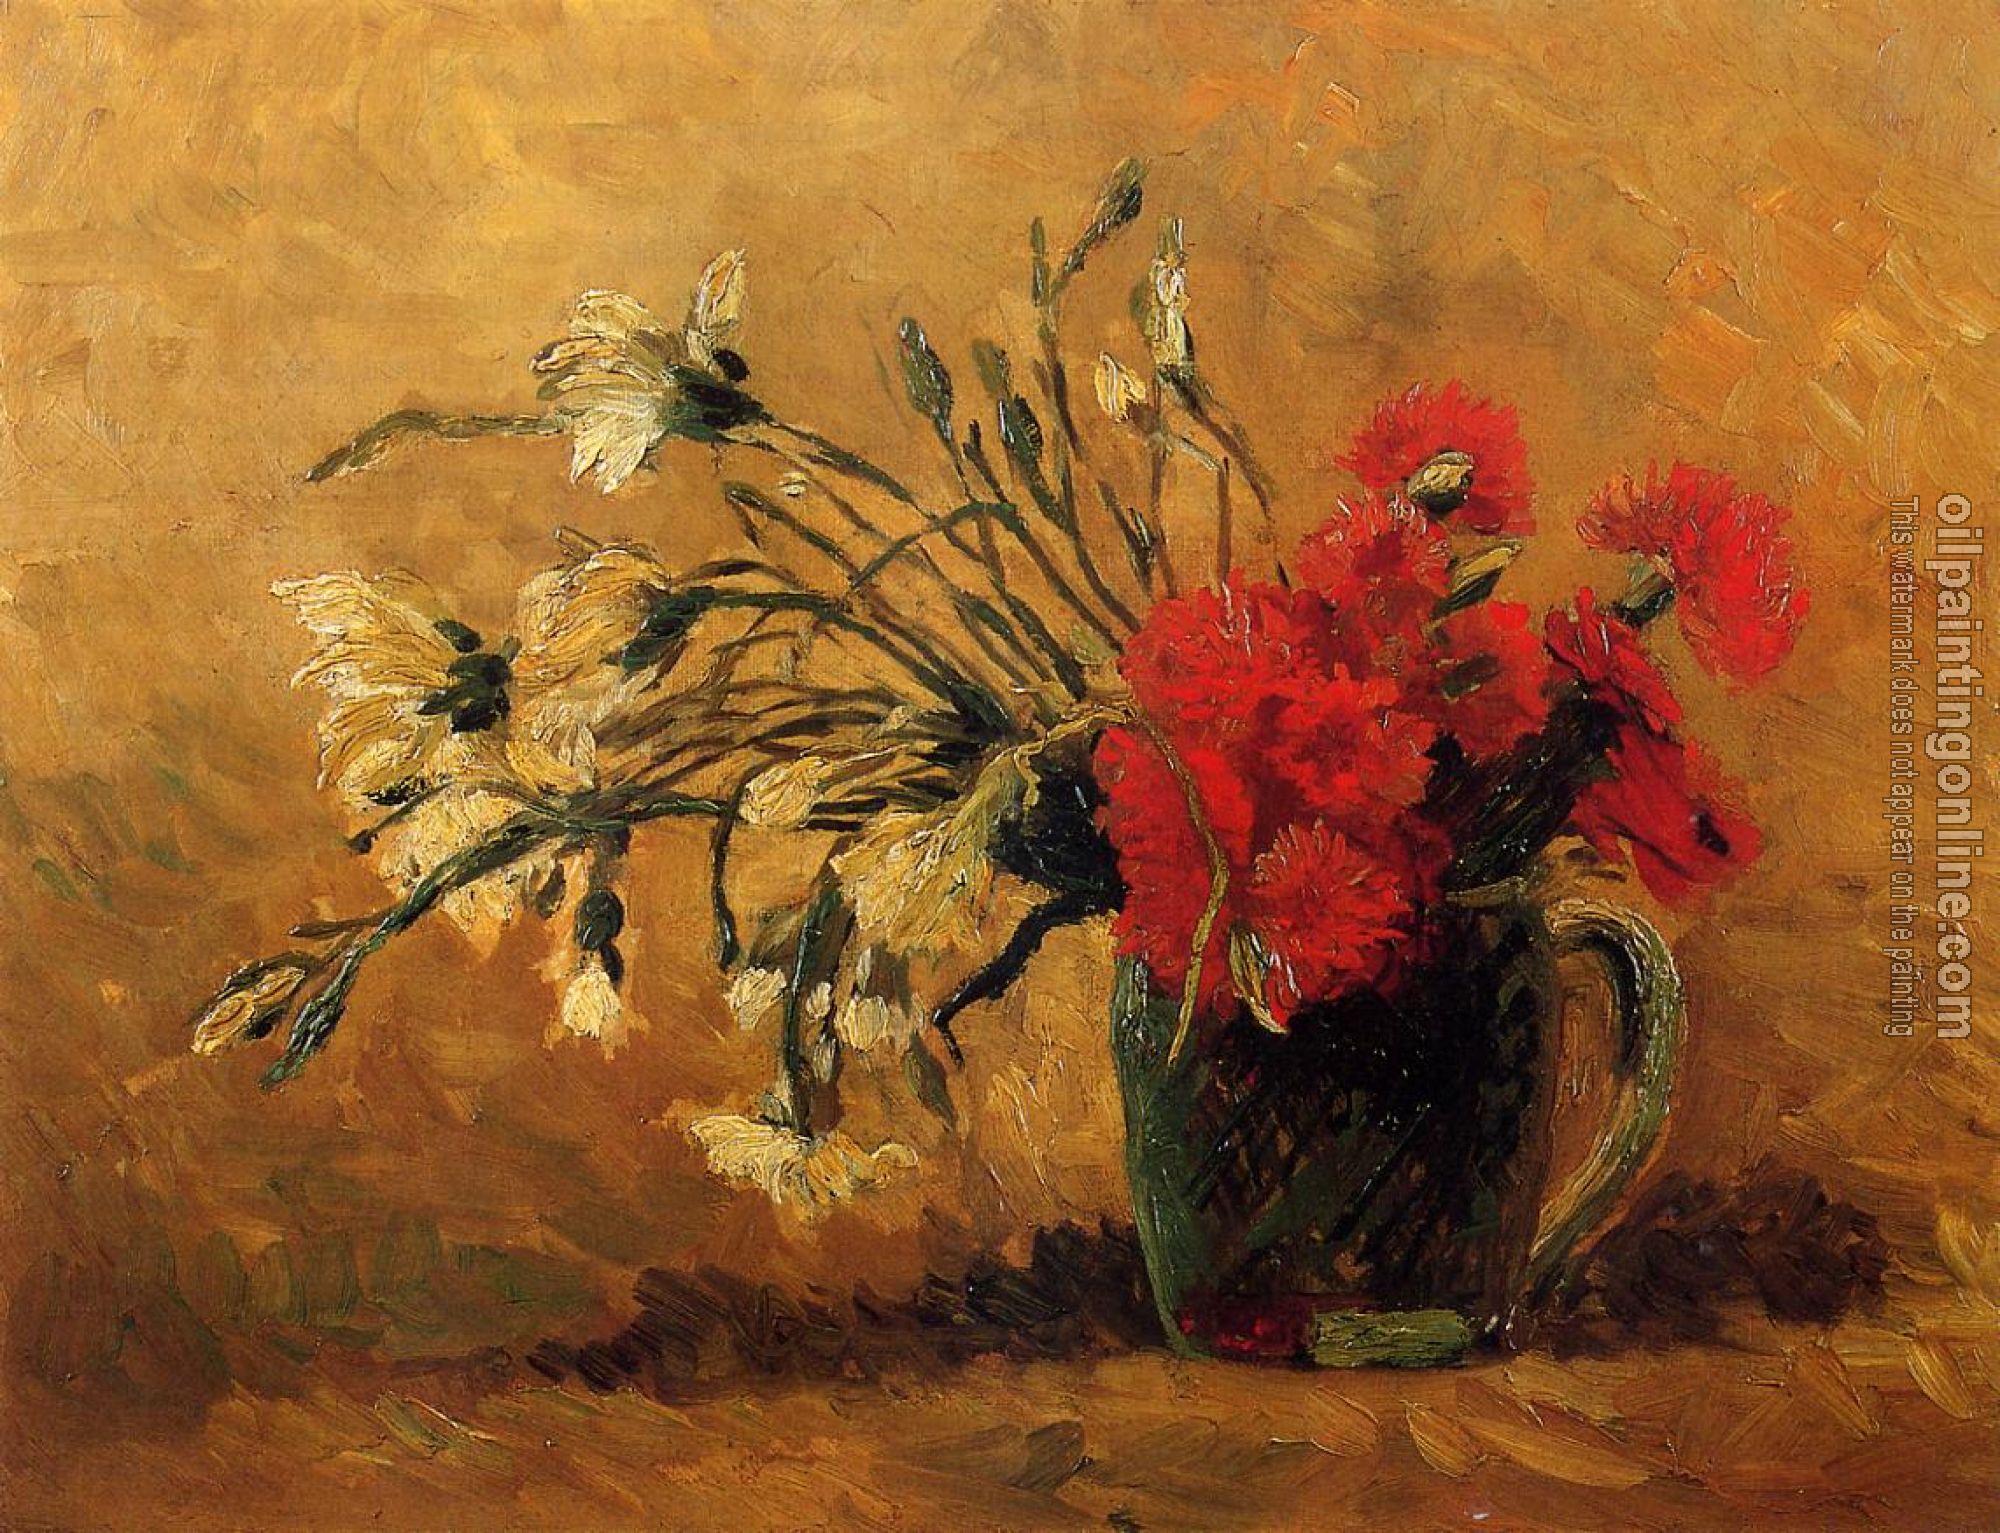 Gogh, Vincent van - Vase with Red and White Carnations on a Yellow Background